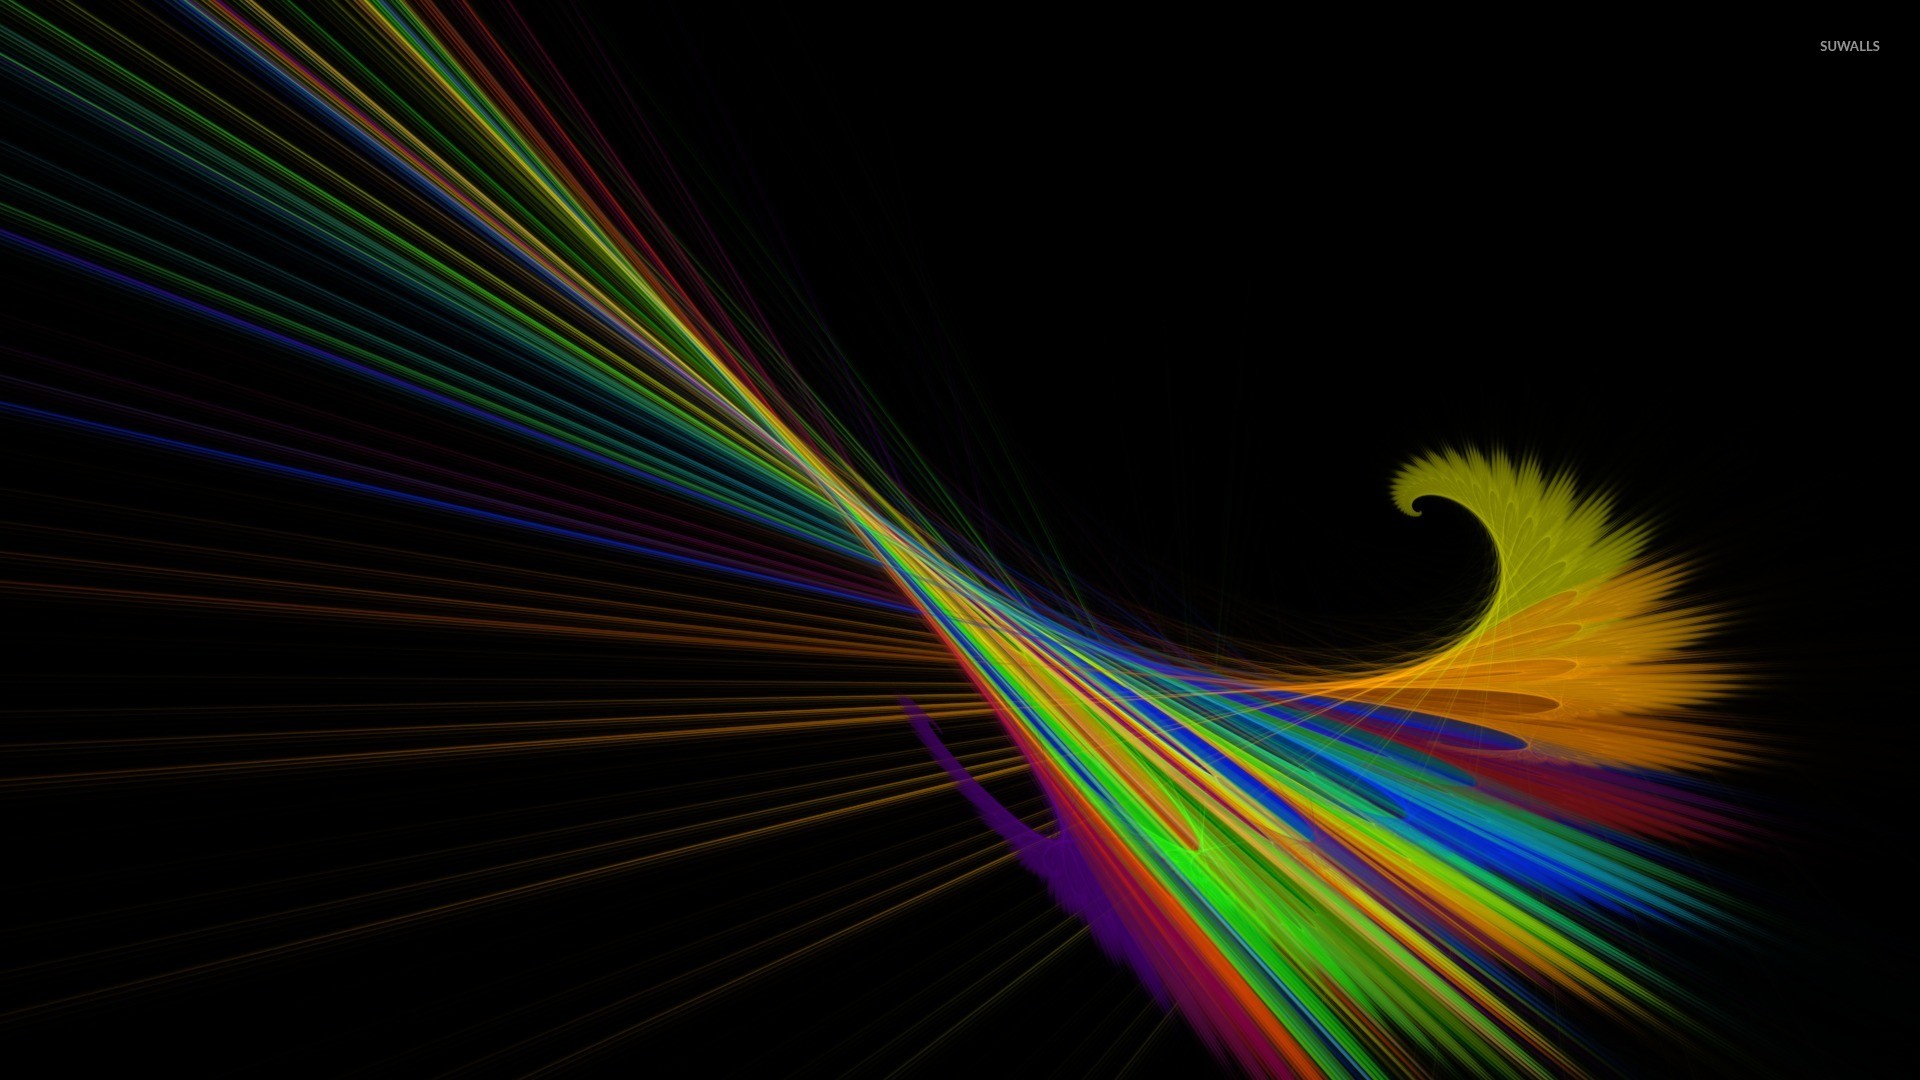 1920x1080 Swirly colorful lines wallpaper